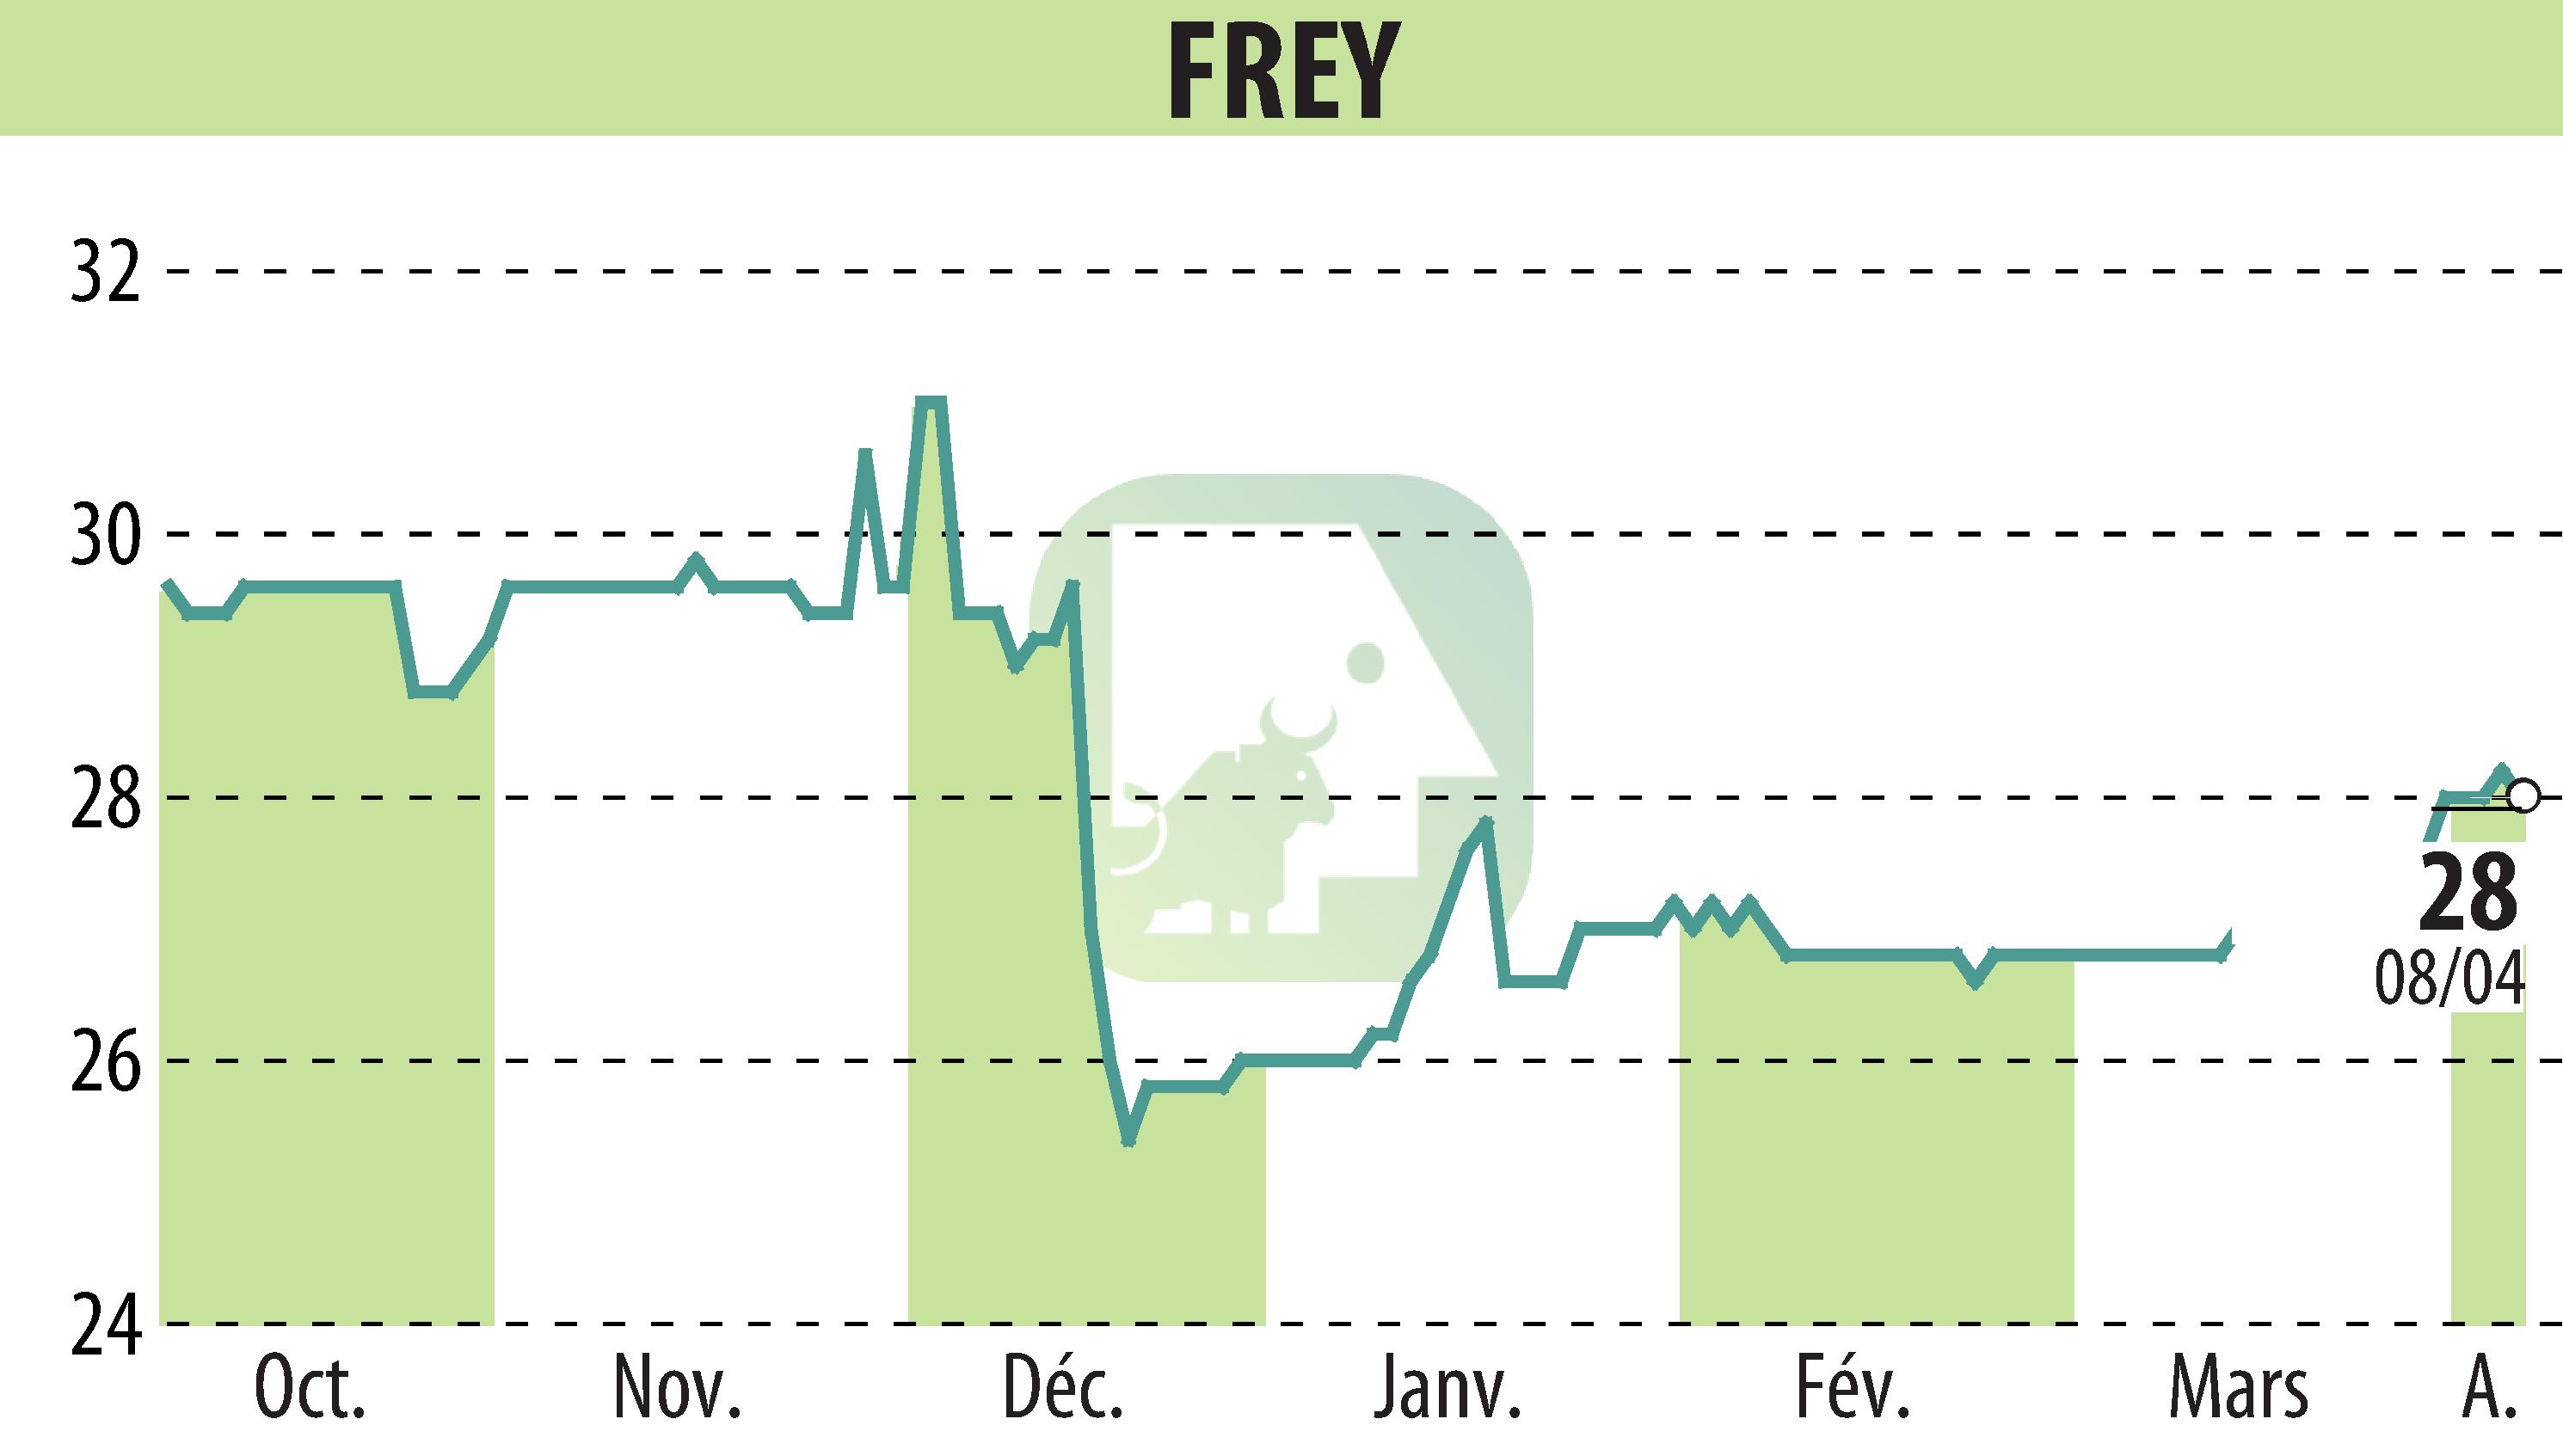 Stock price chart of FREY (EPA:FREY) showing fluctuations.